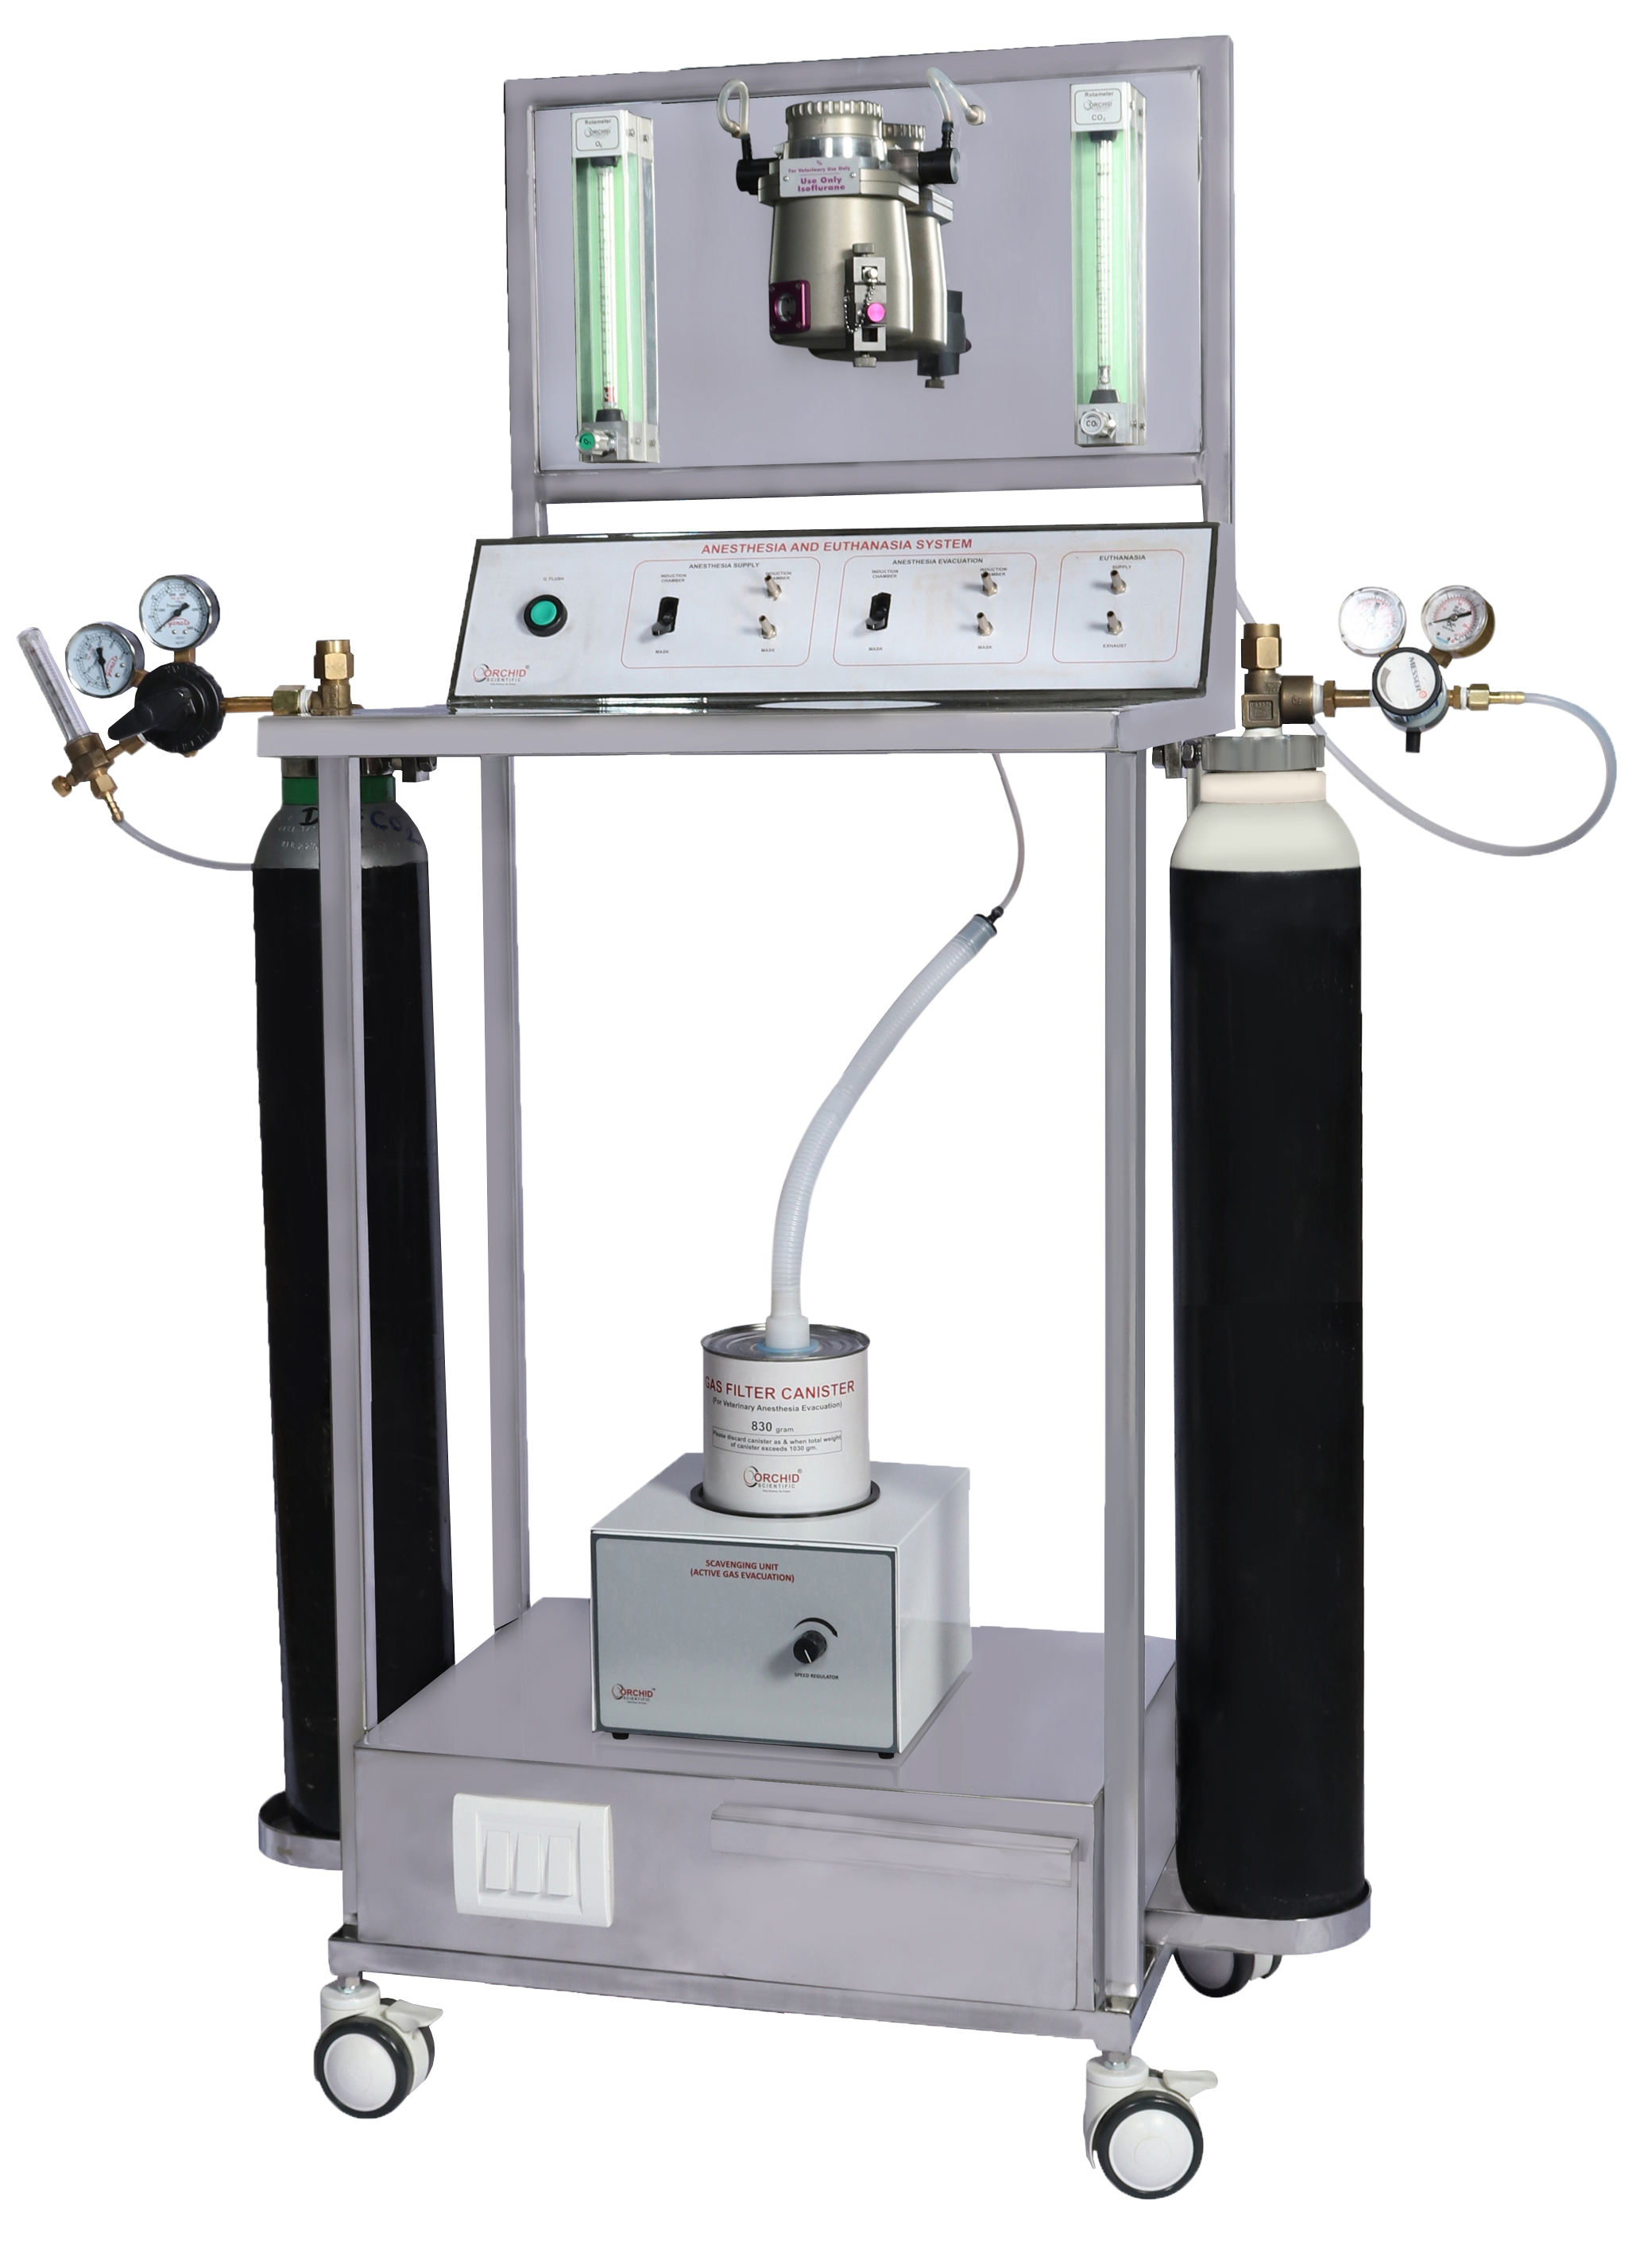 GAS-ANESTHESIA-SYSTEM-FOR-RODENTS-1